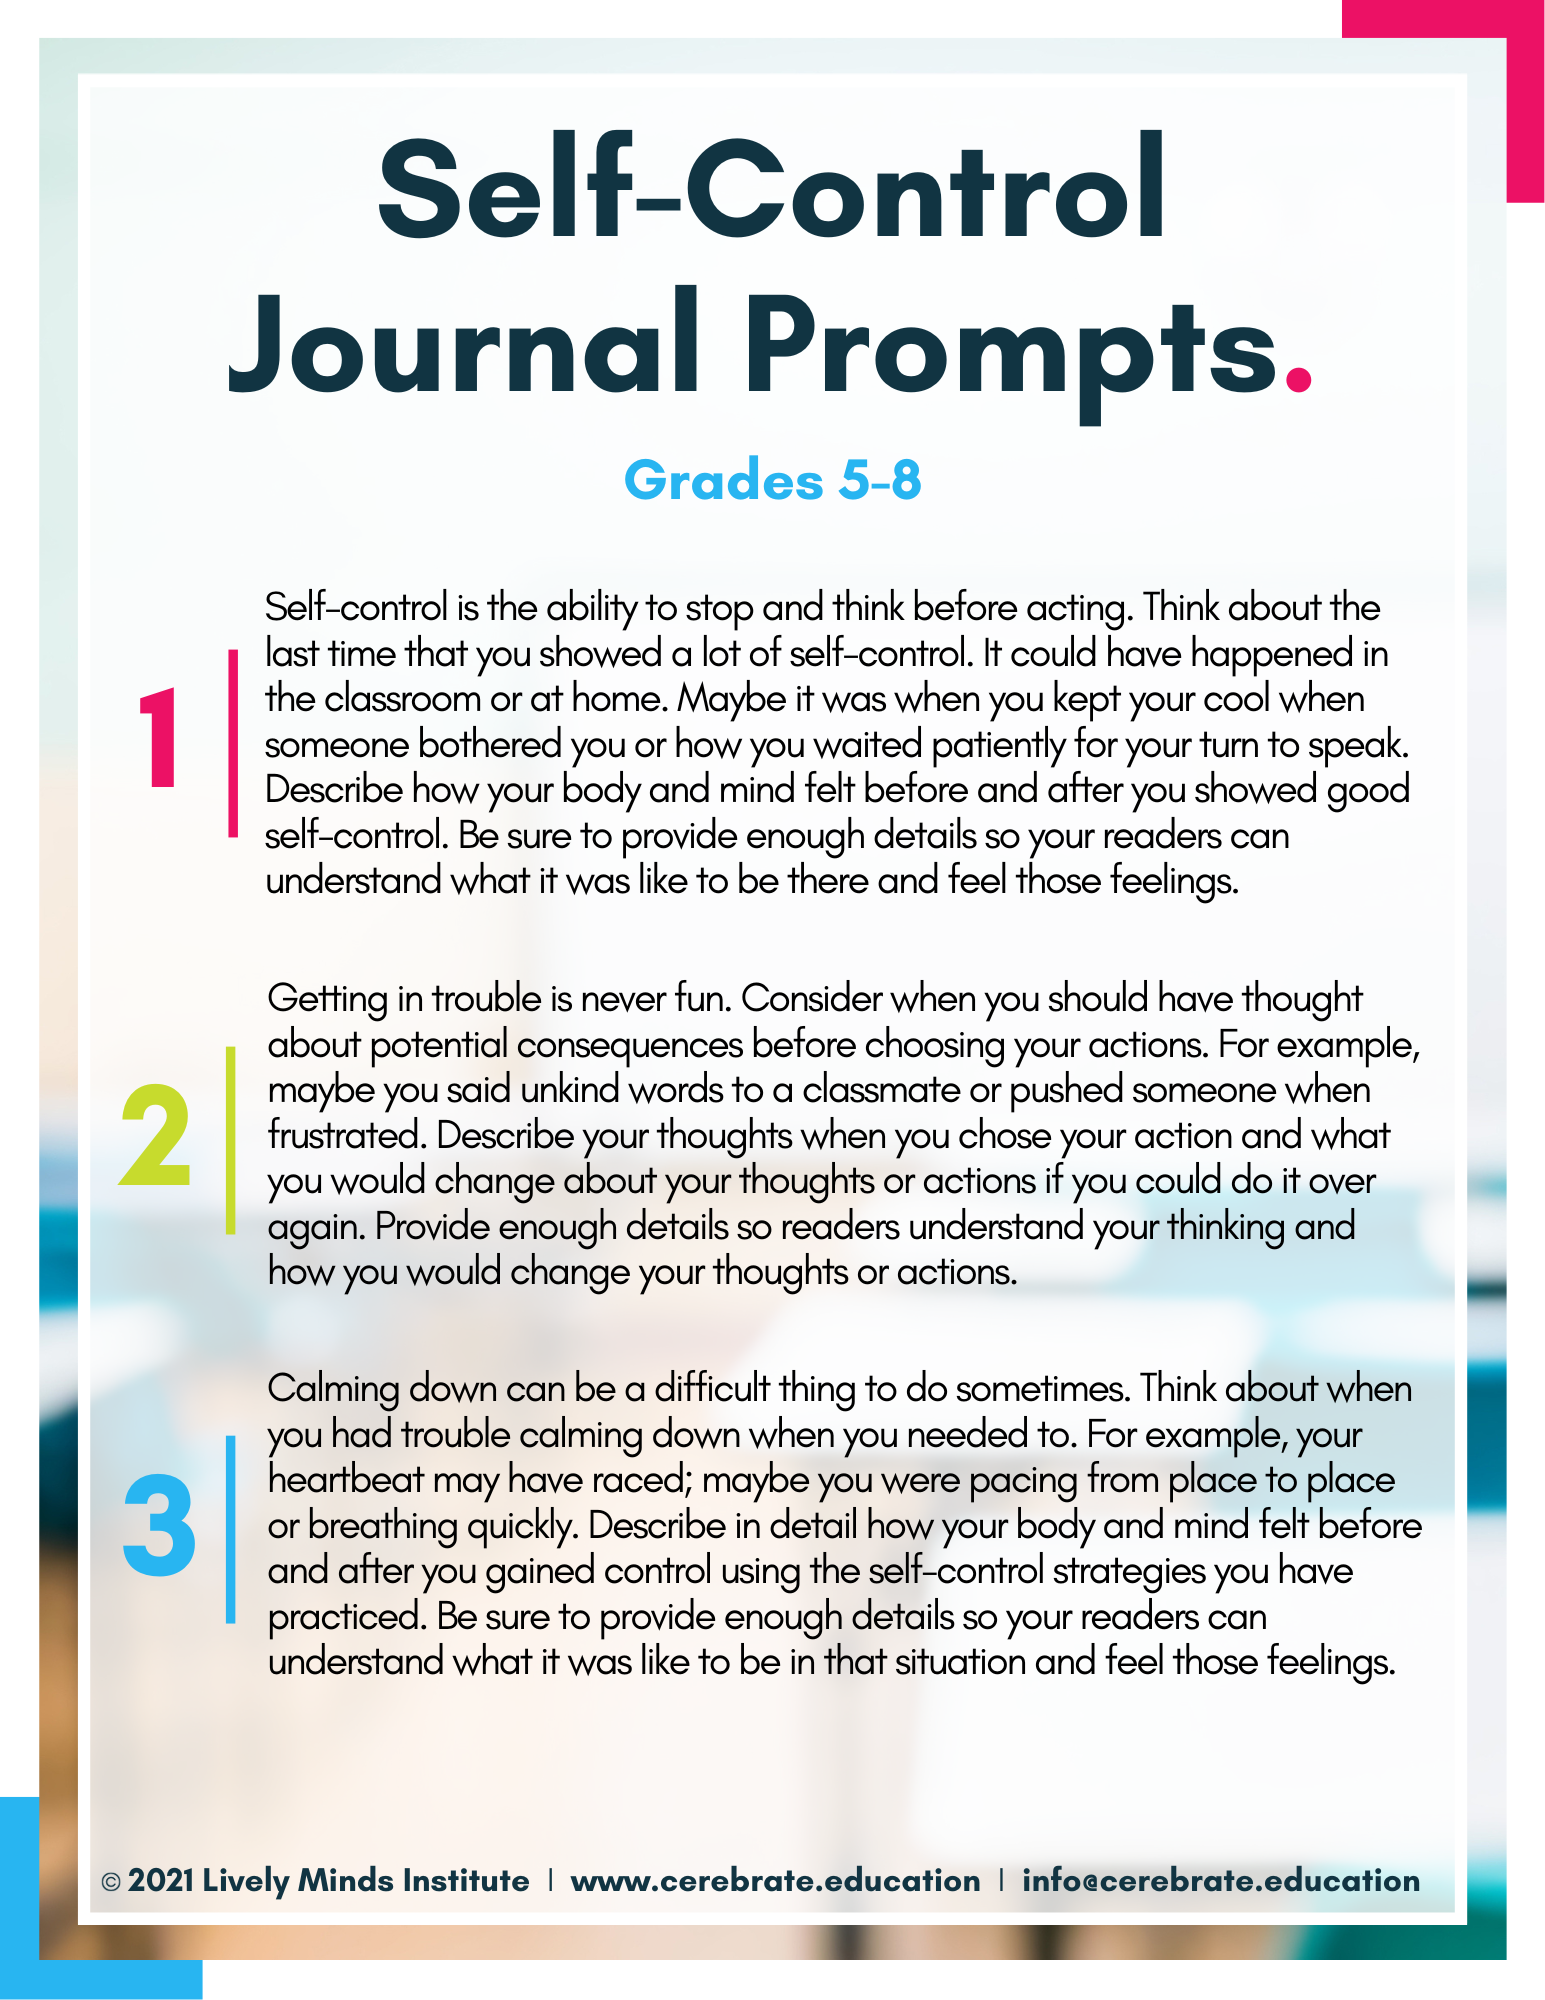 Executive Function Journal Writing Prompts for middle school students